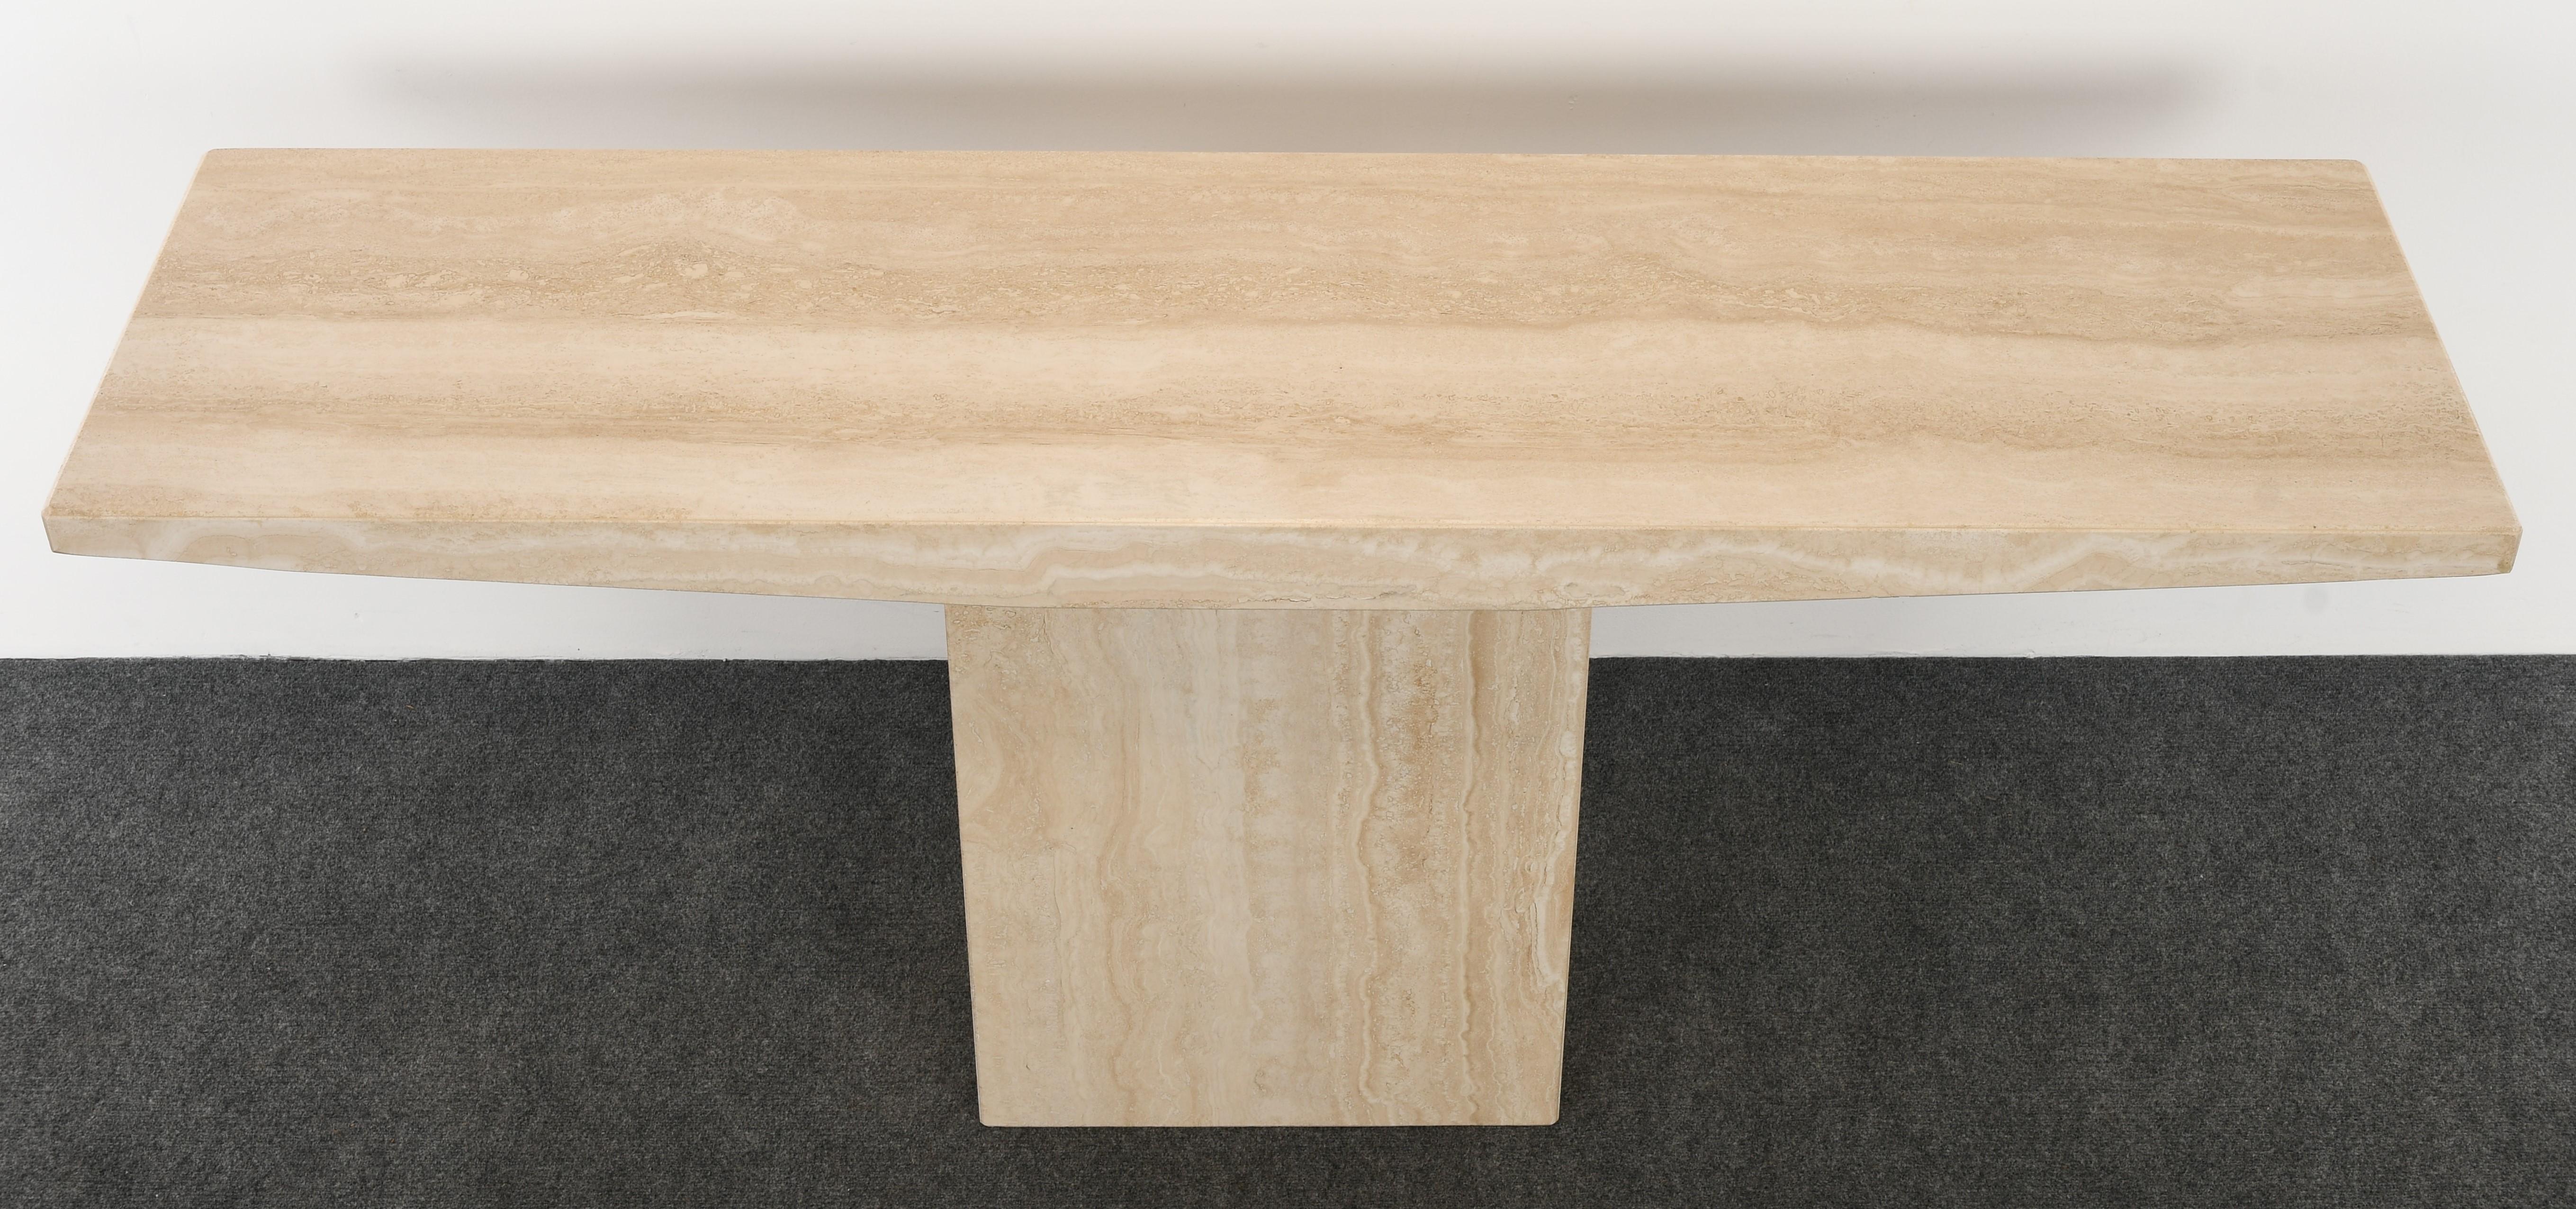 A Minimalist travertine console table for Stone International. This table is structurally sound and has no damage. This console can be displayed in the center of a room. 

Dimensions: 29.38